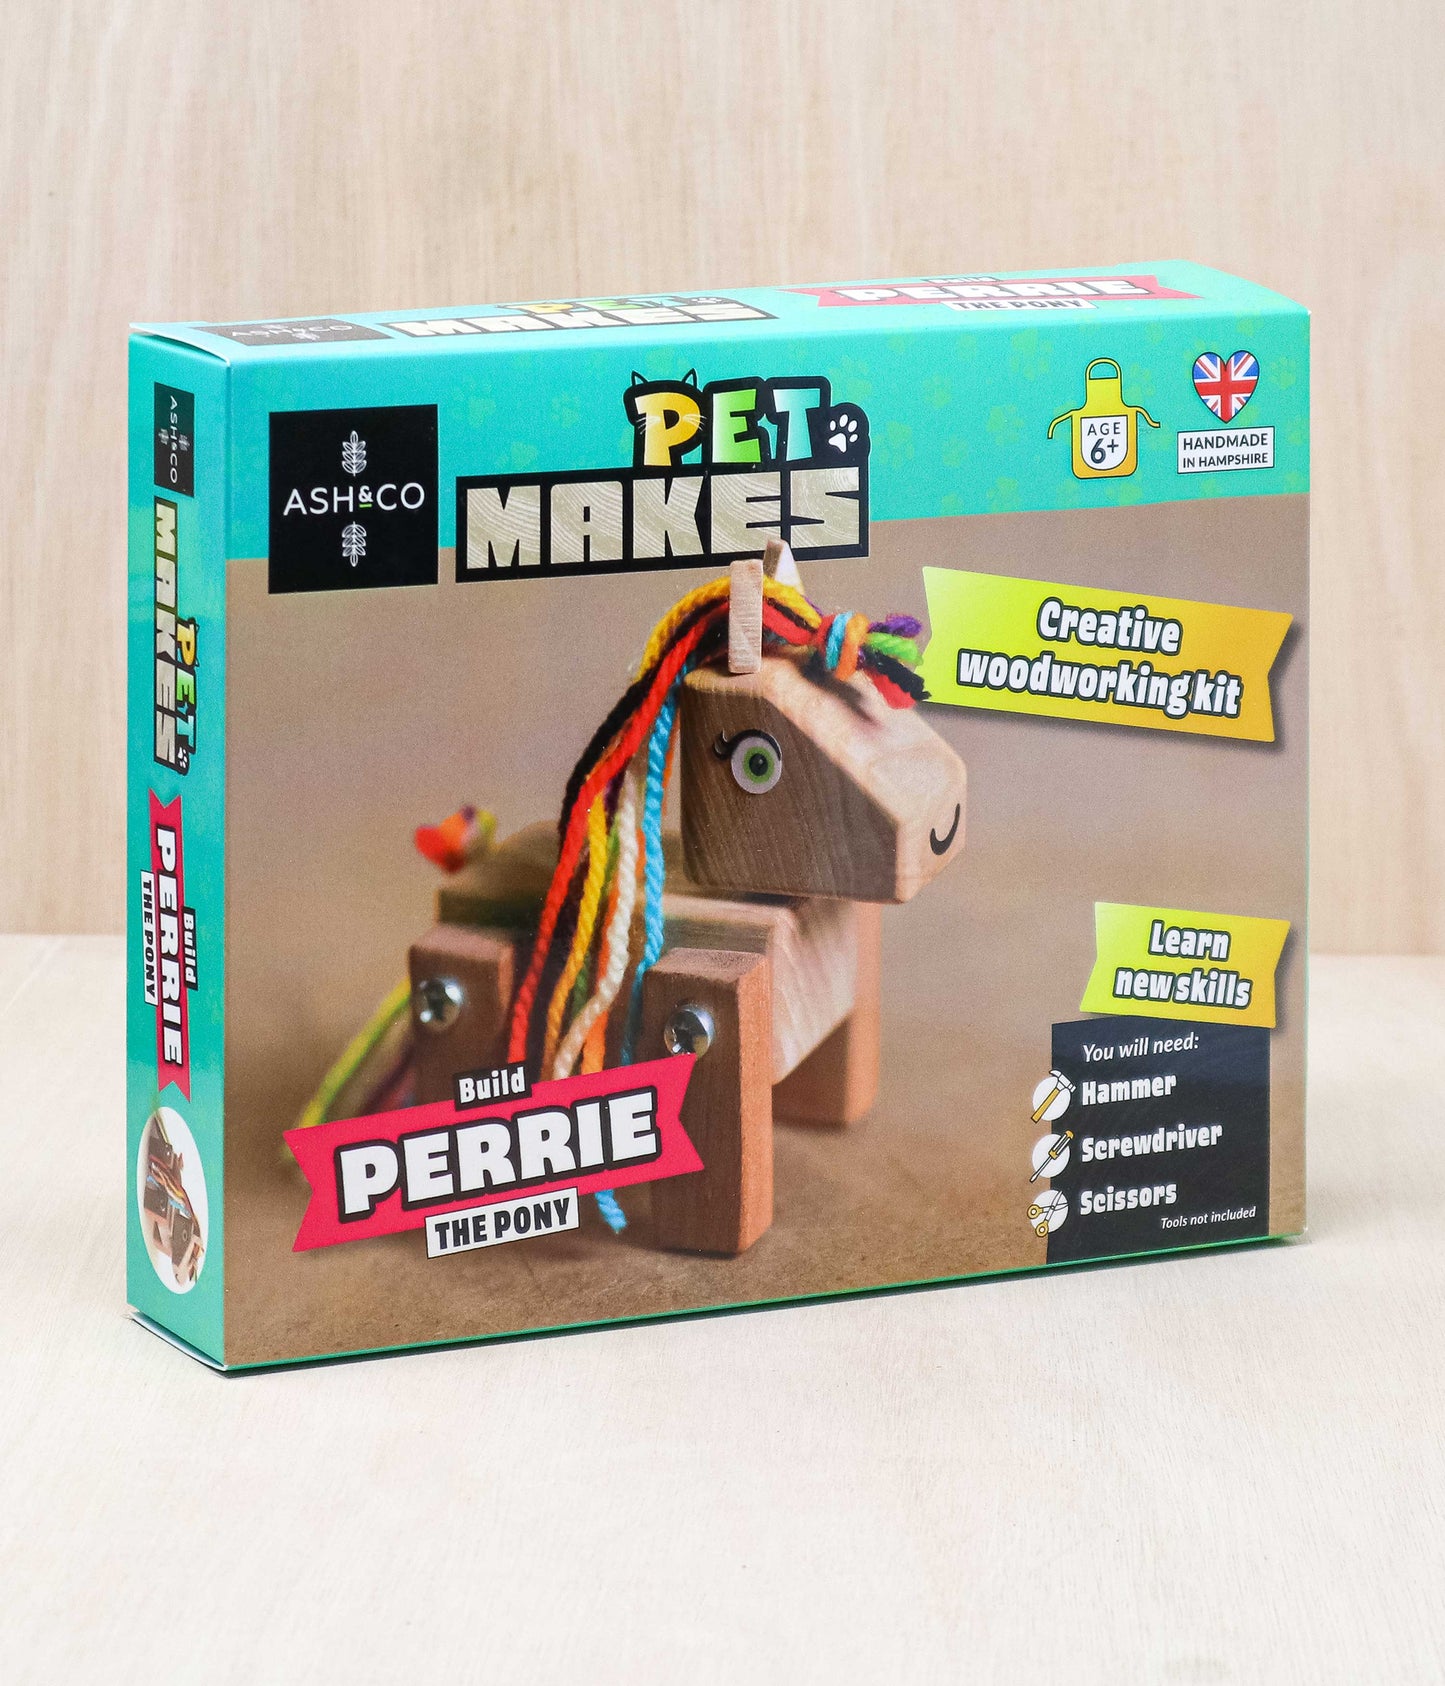 Build Perrie the Pony